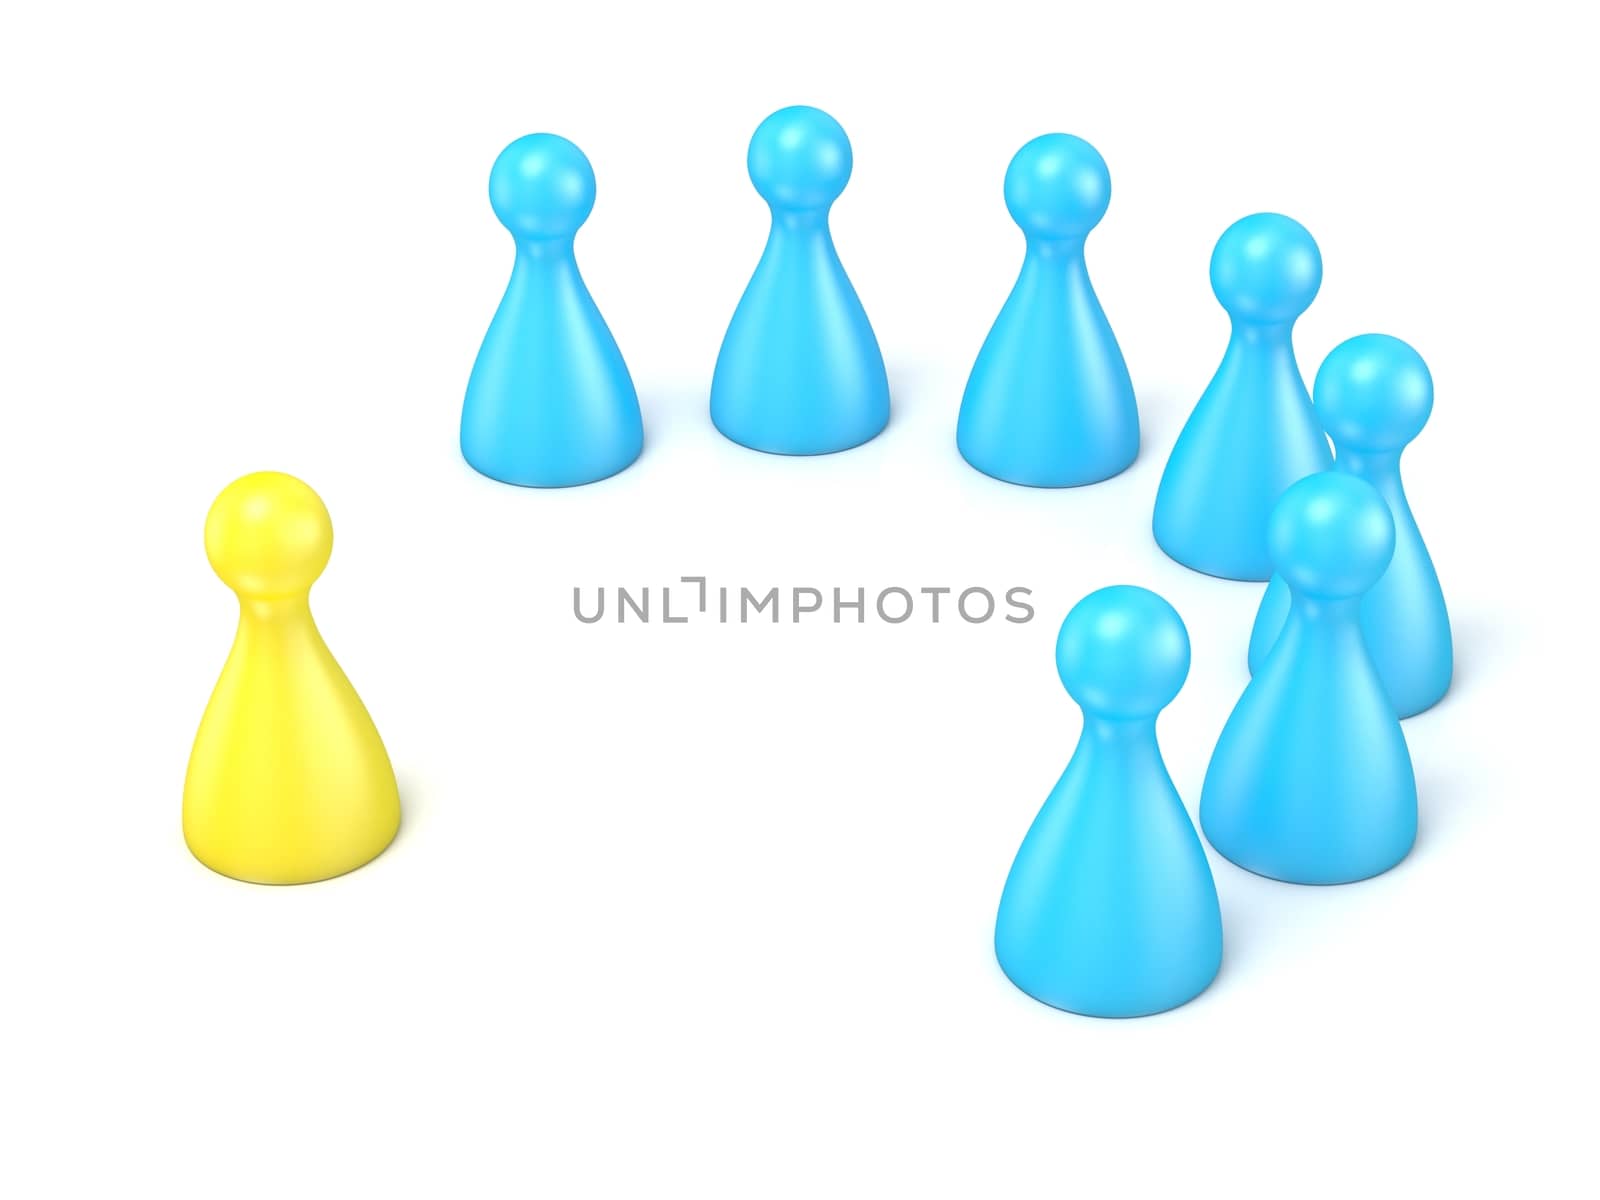 Interview with staff. Scene made of toy pawns. 3D render illustration isolated on white background